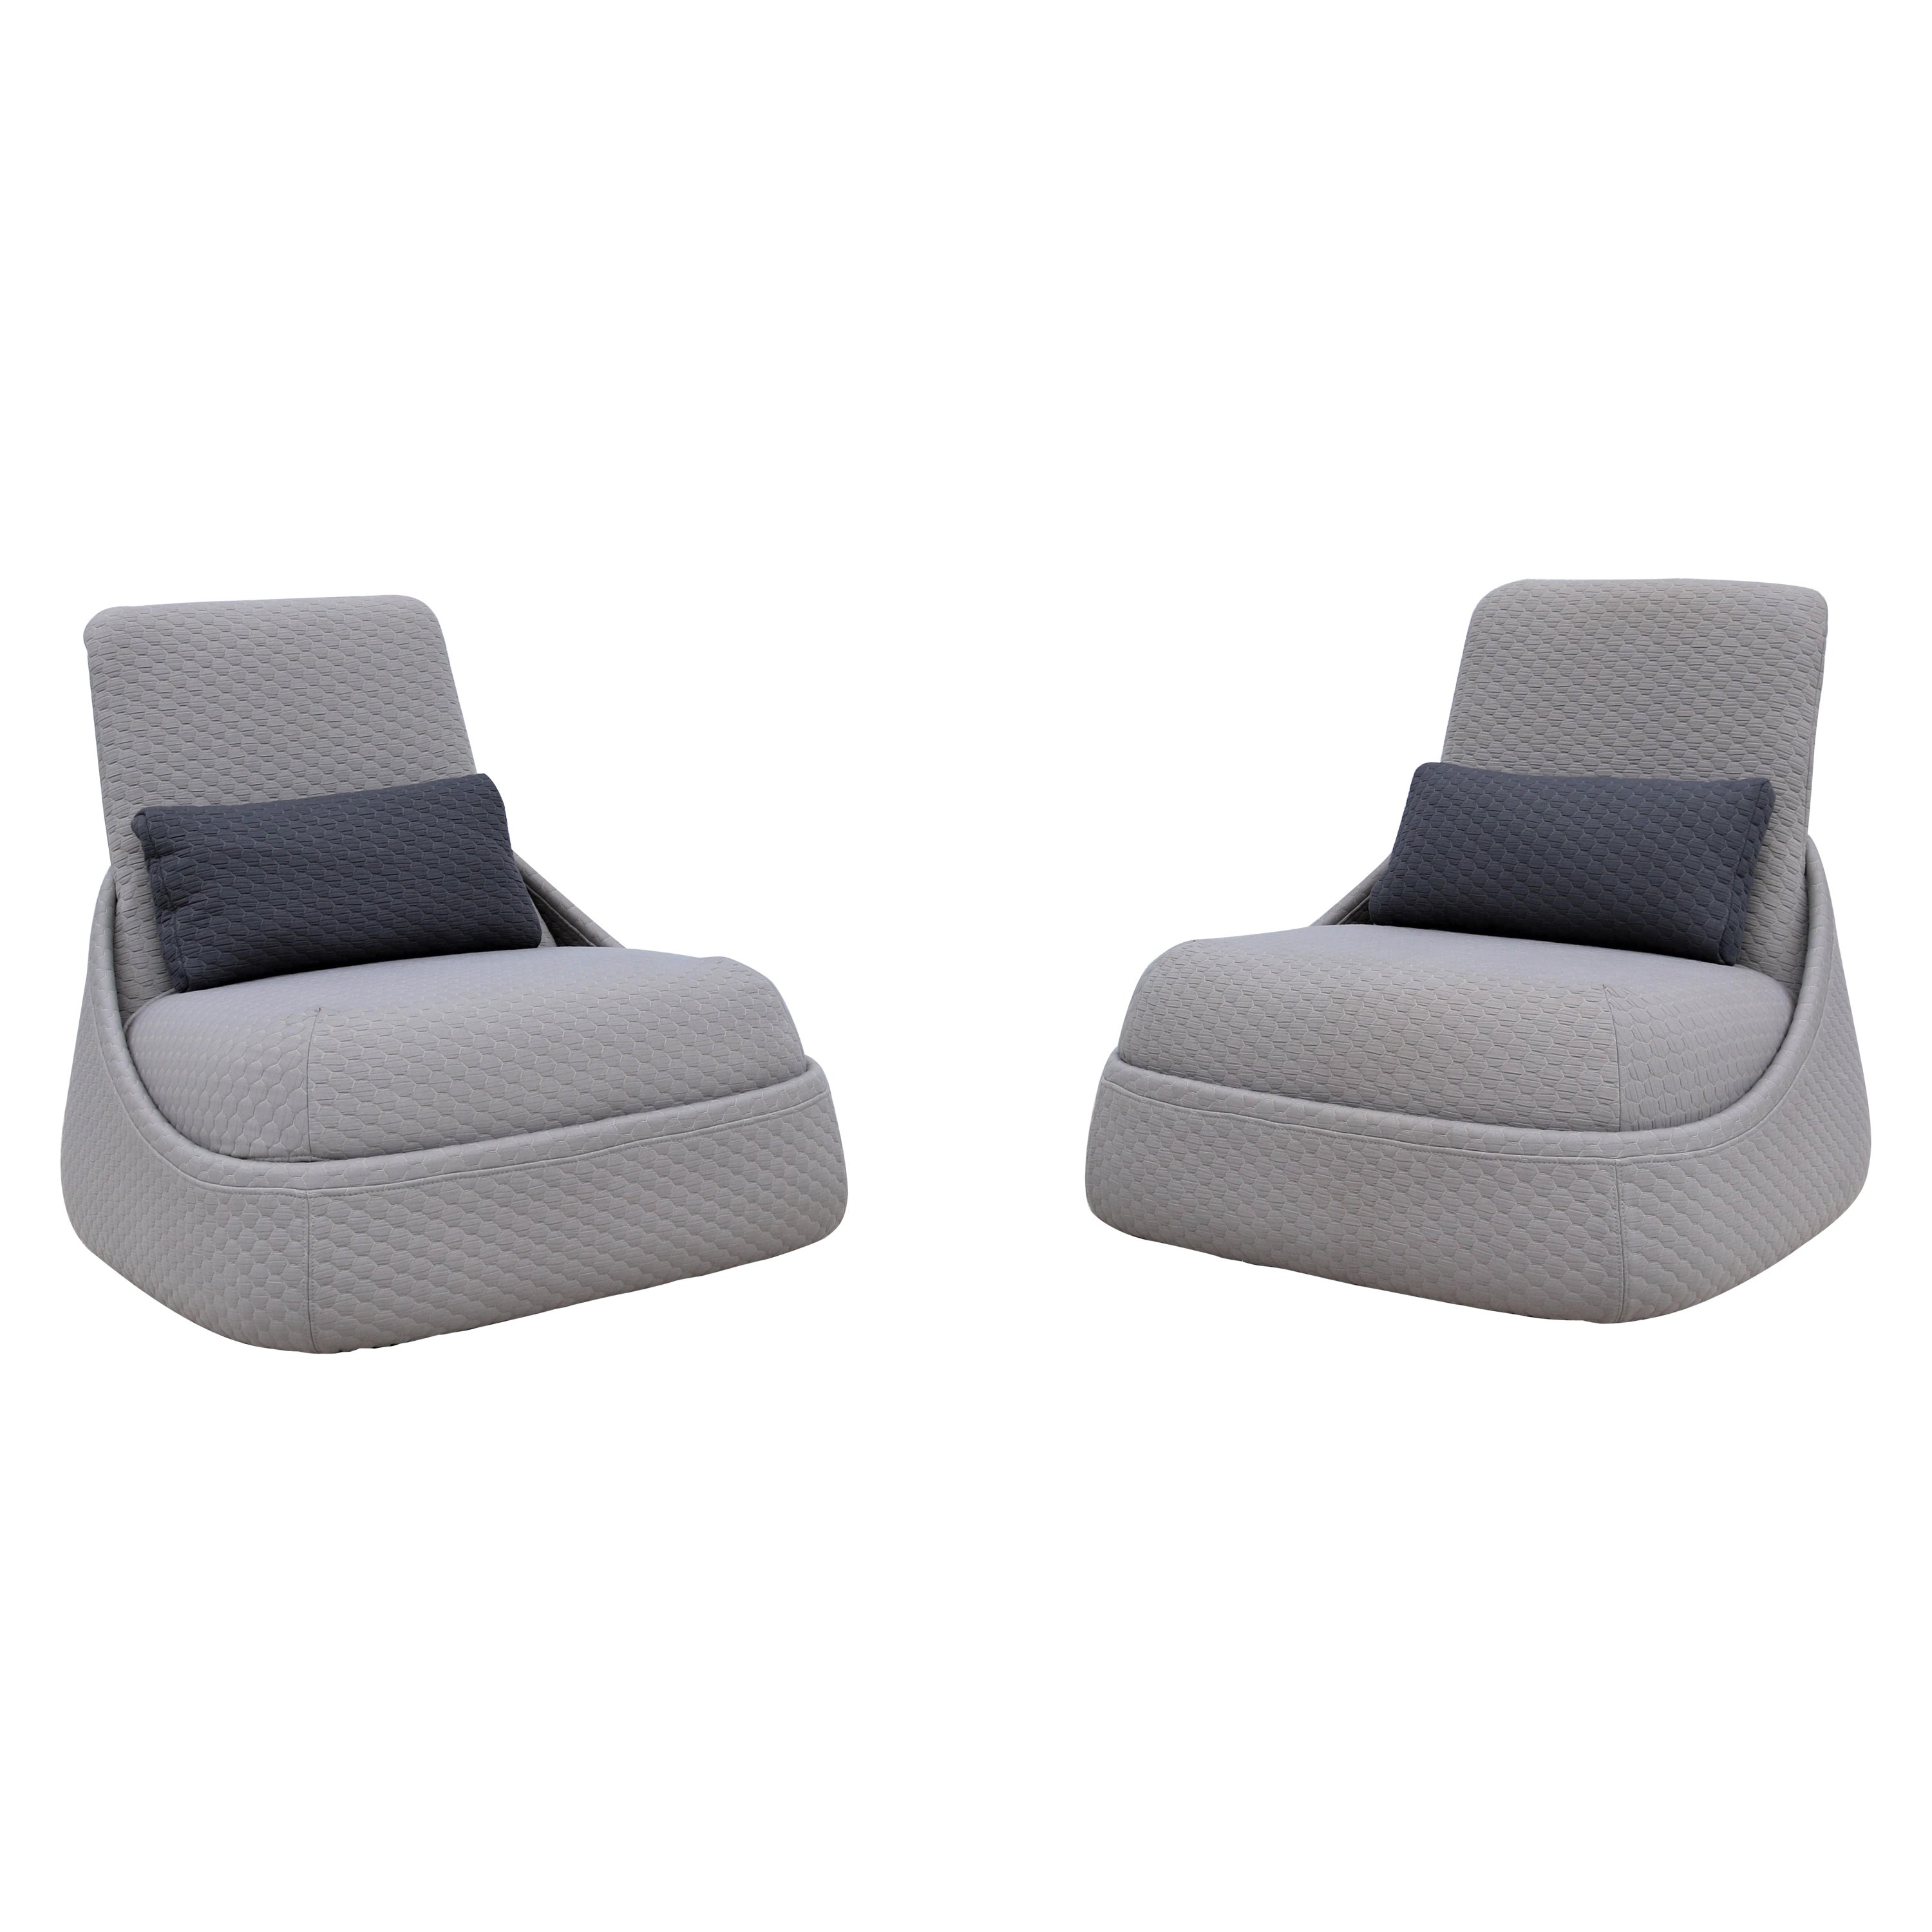 Modern Patricia Urquiola for Coalesse Hosu Lounge Chairs with Ottoman, a Pair